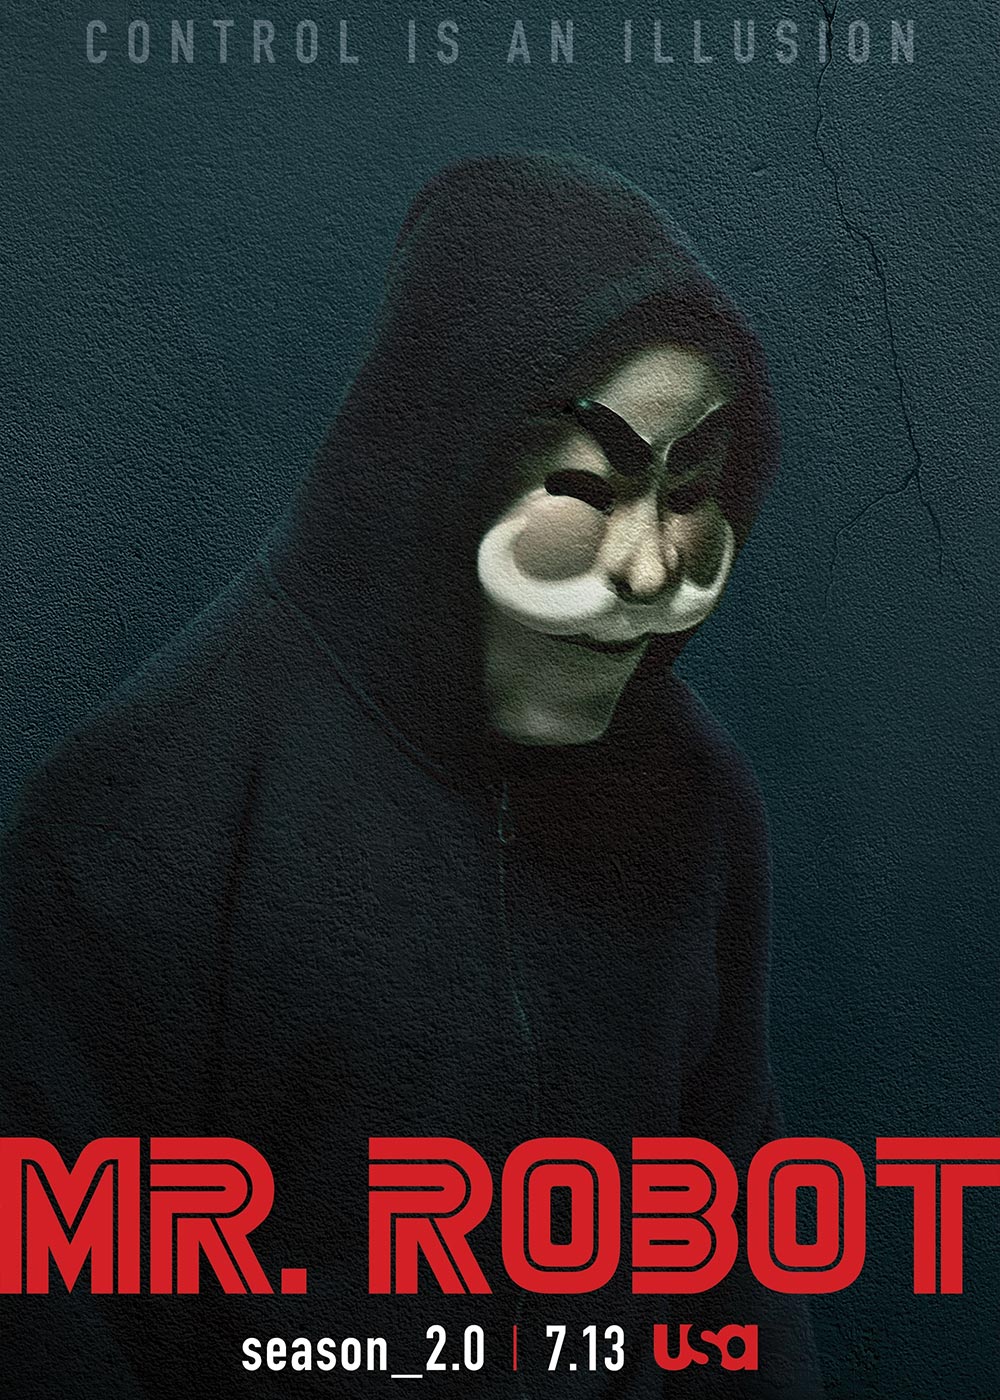 Mr. Robot Season 2 TV Series (2016) | Release Date, Review, Cast, Watch Online at Prime Video 360